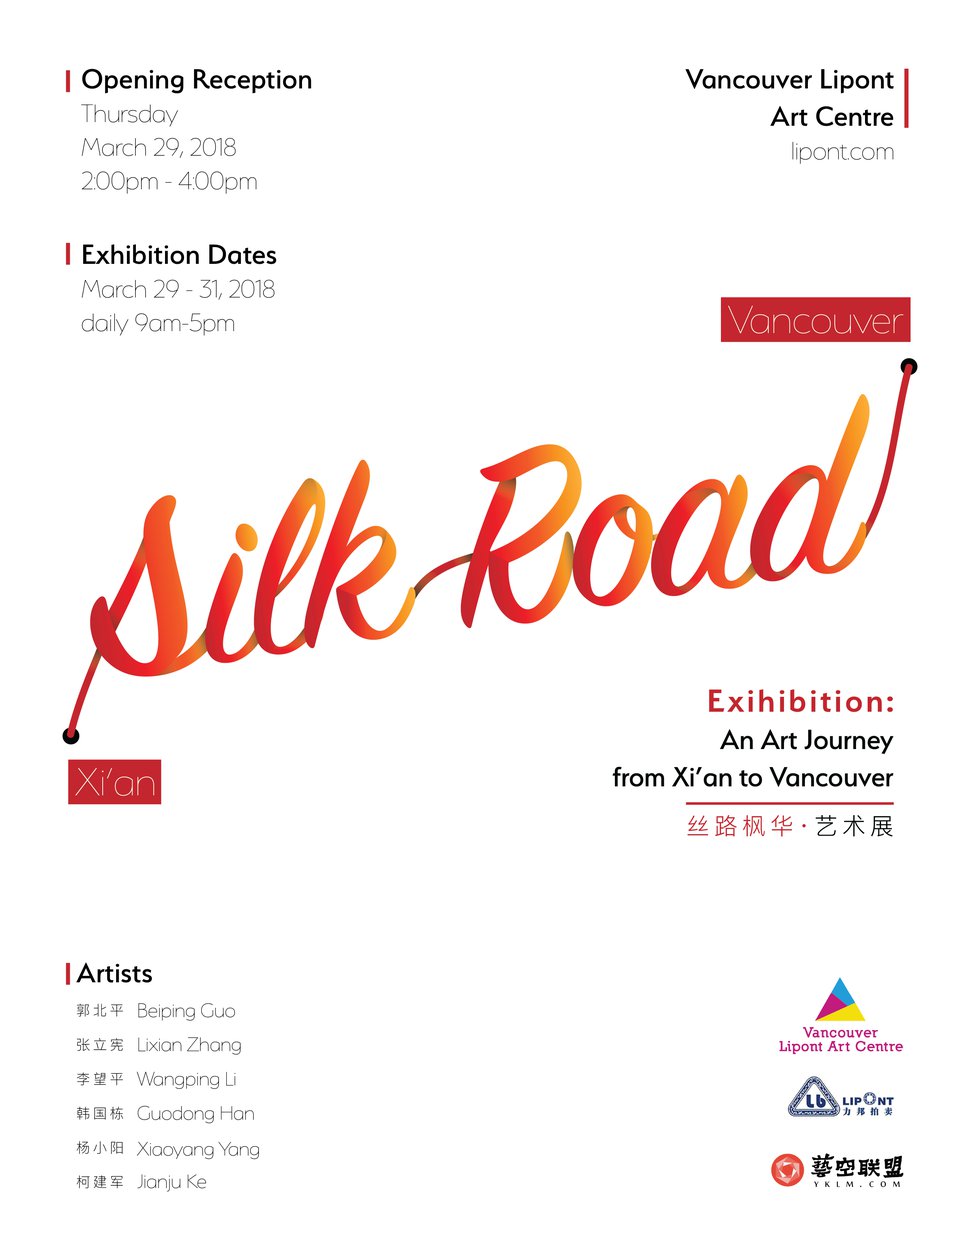 "Silk Road - An Art Journey From Xi’an to Vancouver"